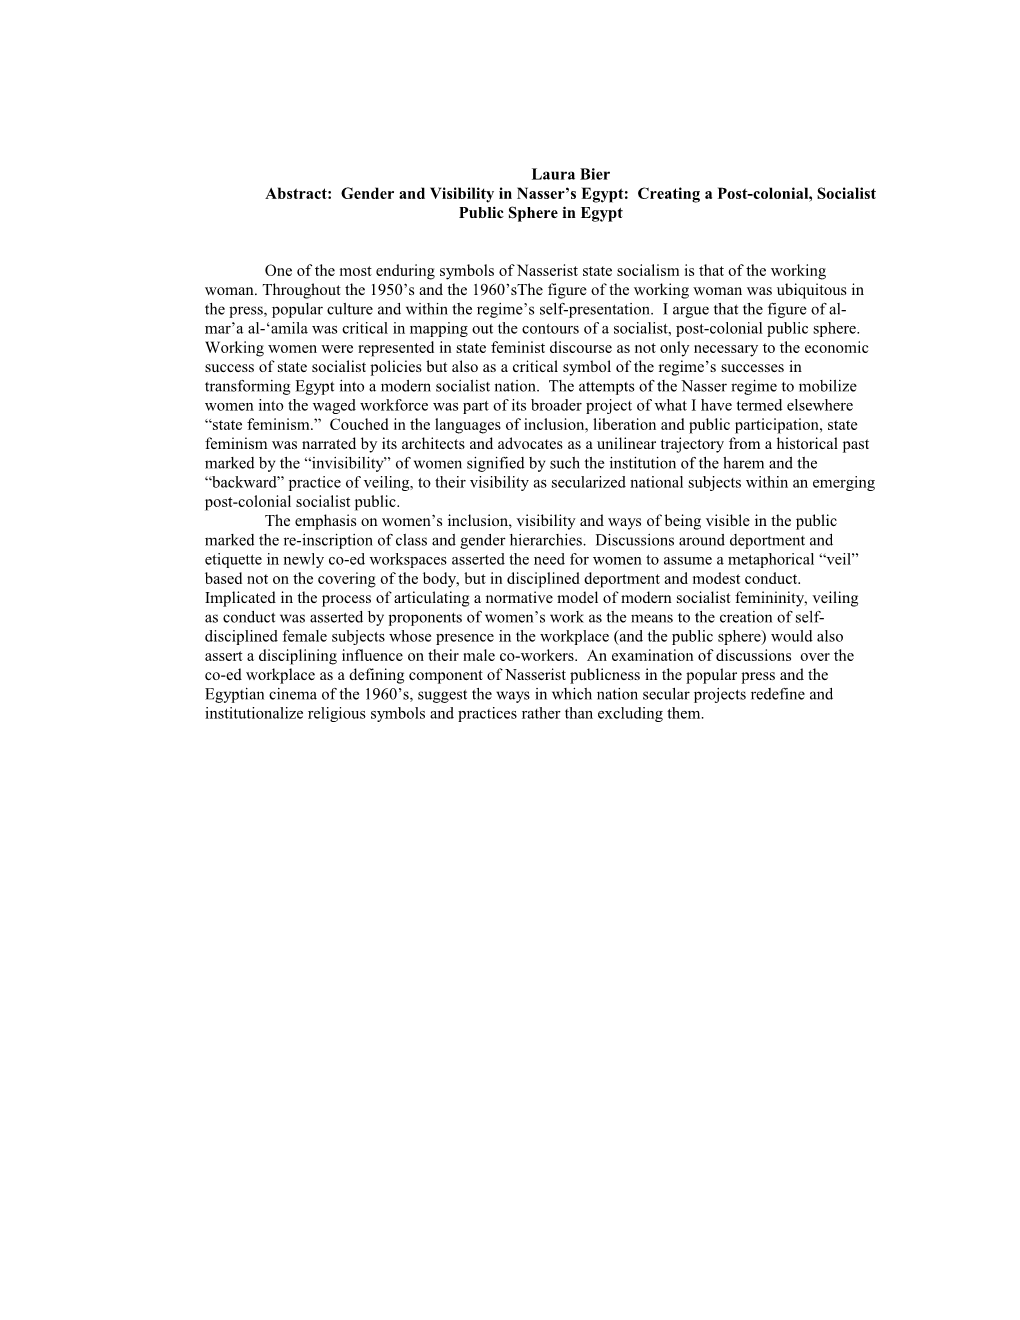 Abstract: Gender and Visibility in Nasser S Egypt: Creating a Post-Colonial, Socialist